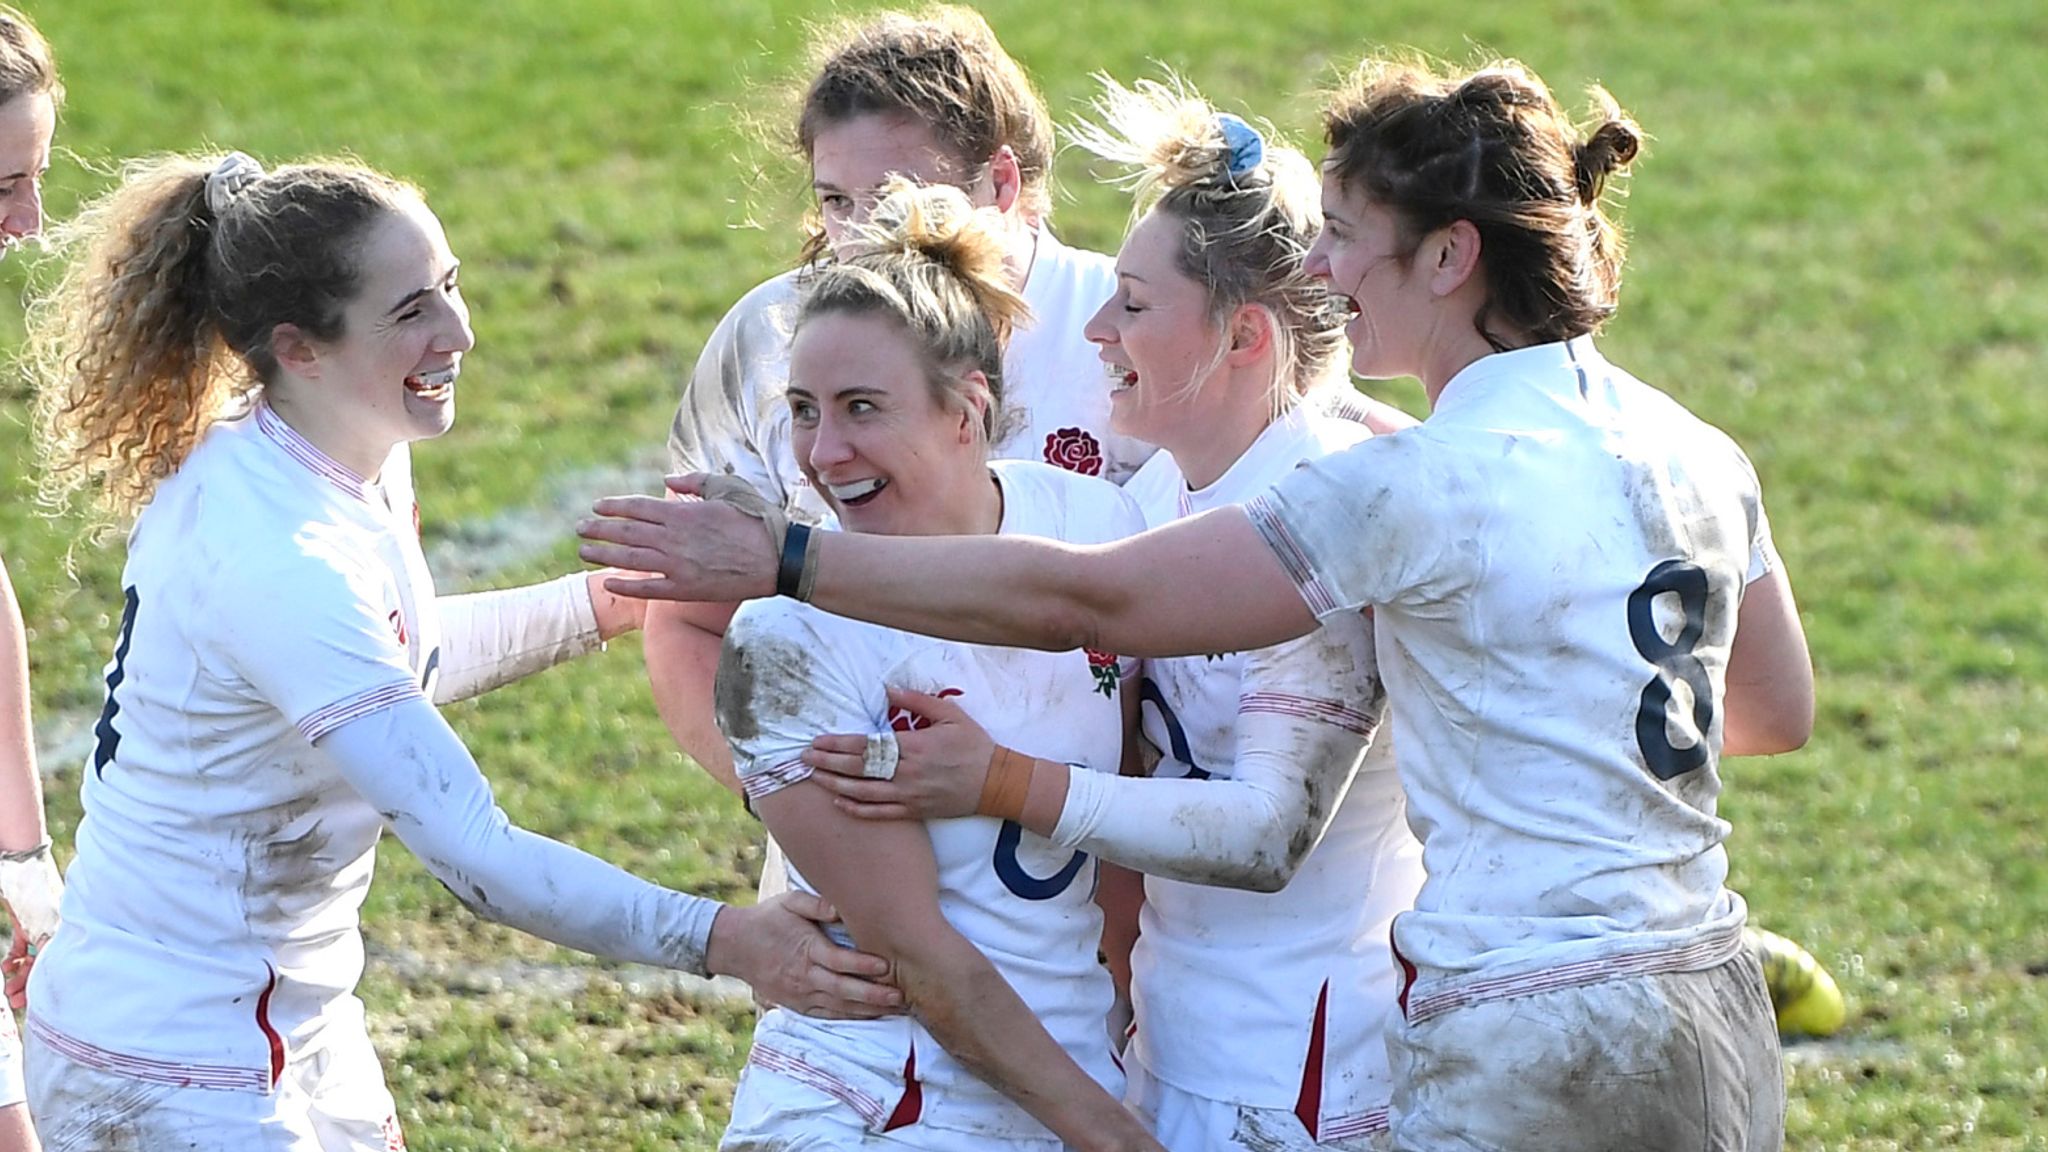 Women S Six Nations Red Roses Vs Wales Preview Rugby Union News Images, Photos, Reviews